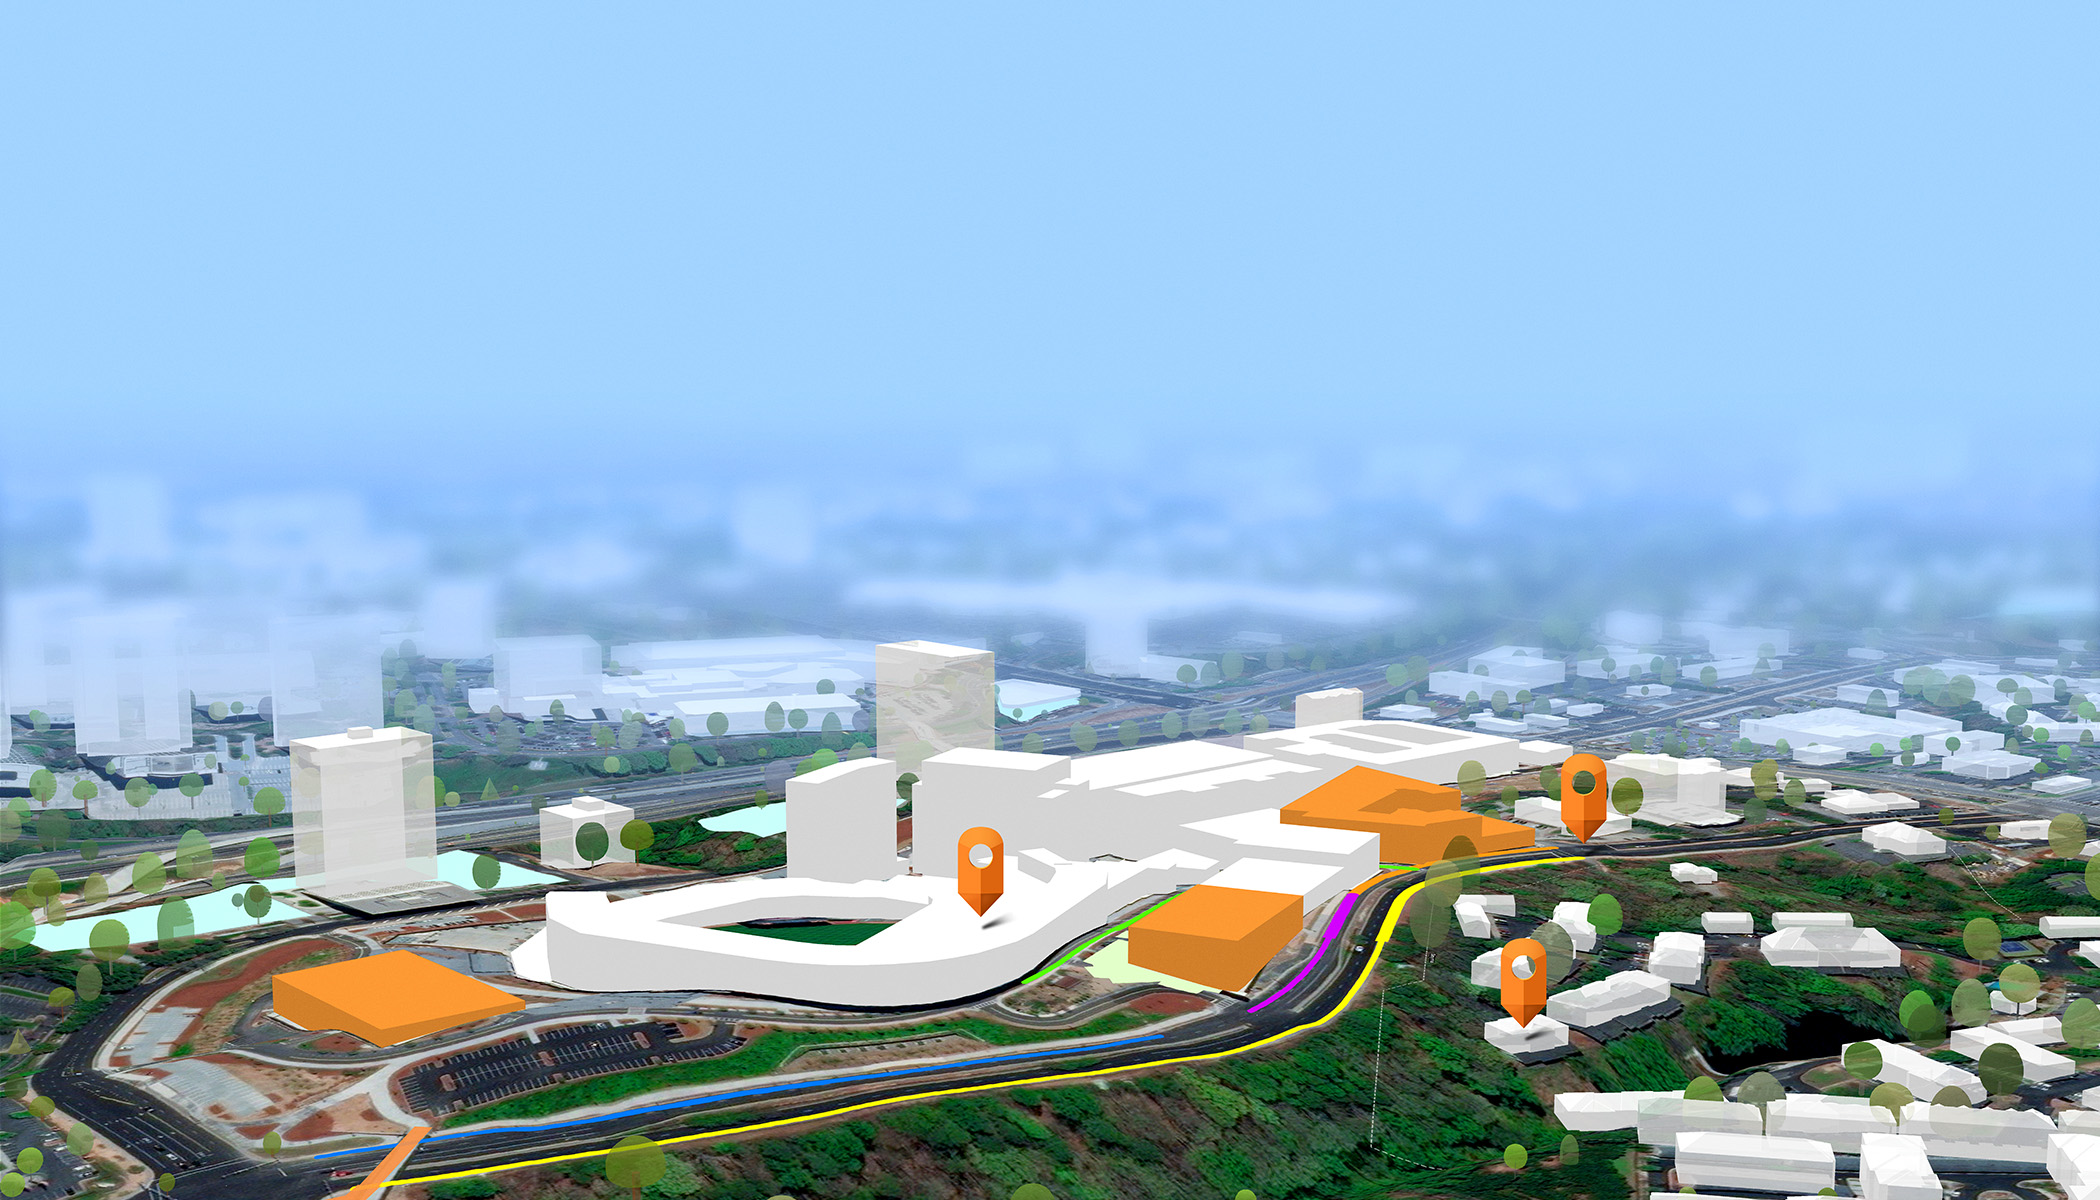 A 3D design of a city with the background blurred and the foreground showing white and orange buildings and three orange navigation pin icons